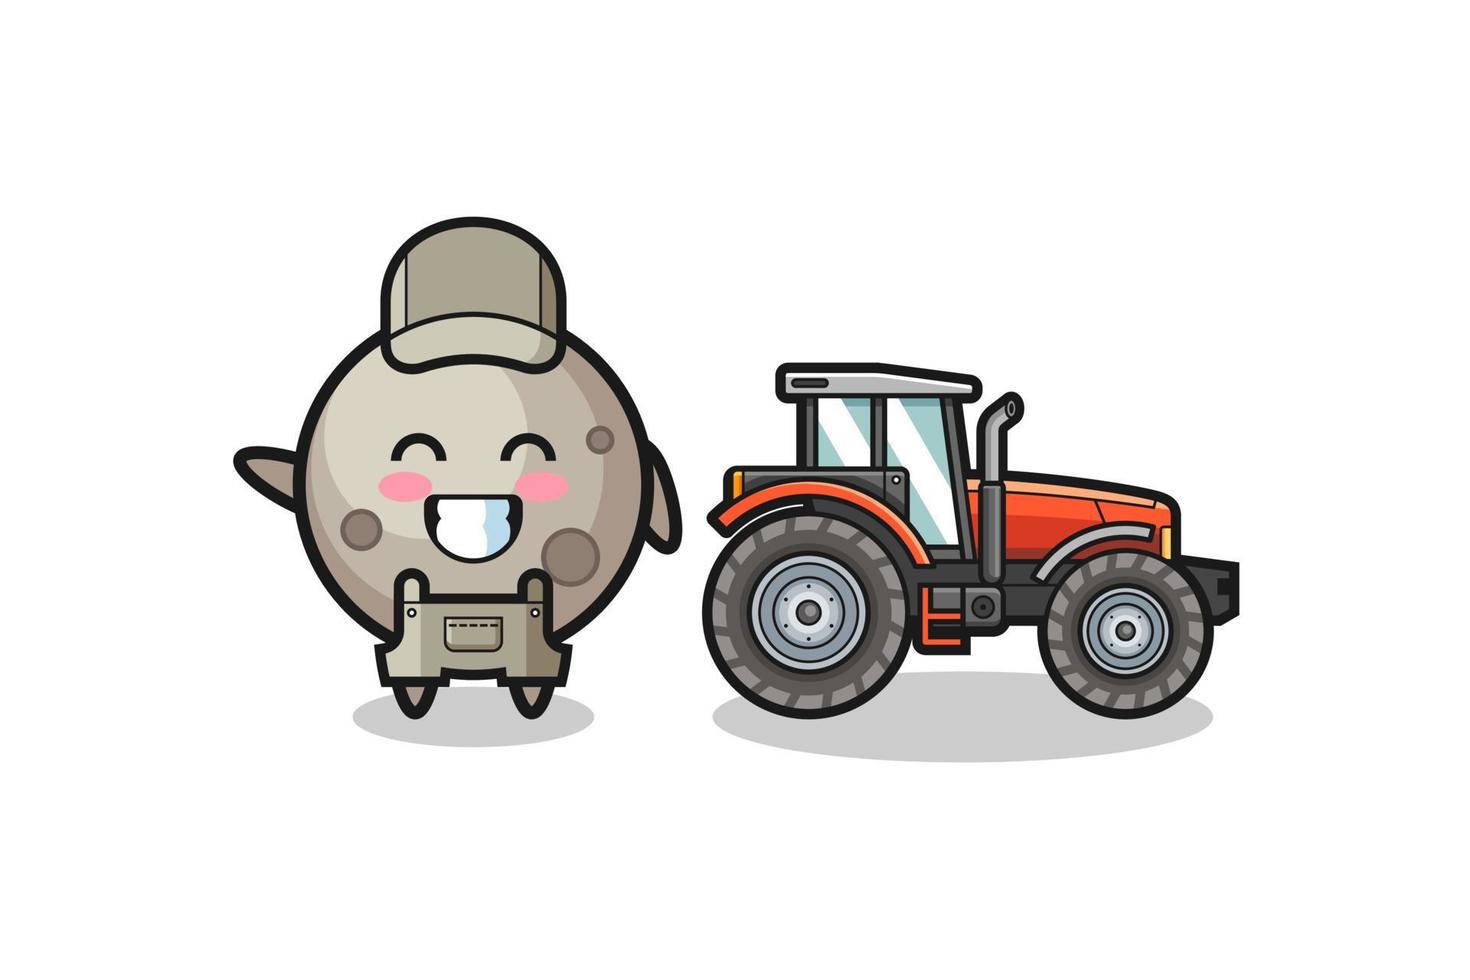 the moon farmer mascot standing beside a tractor vector